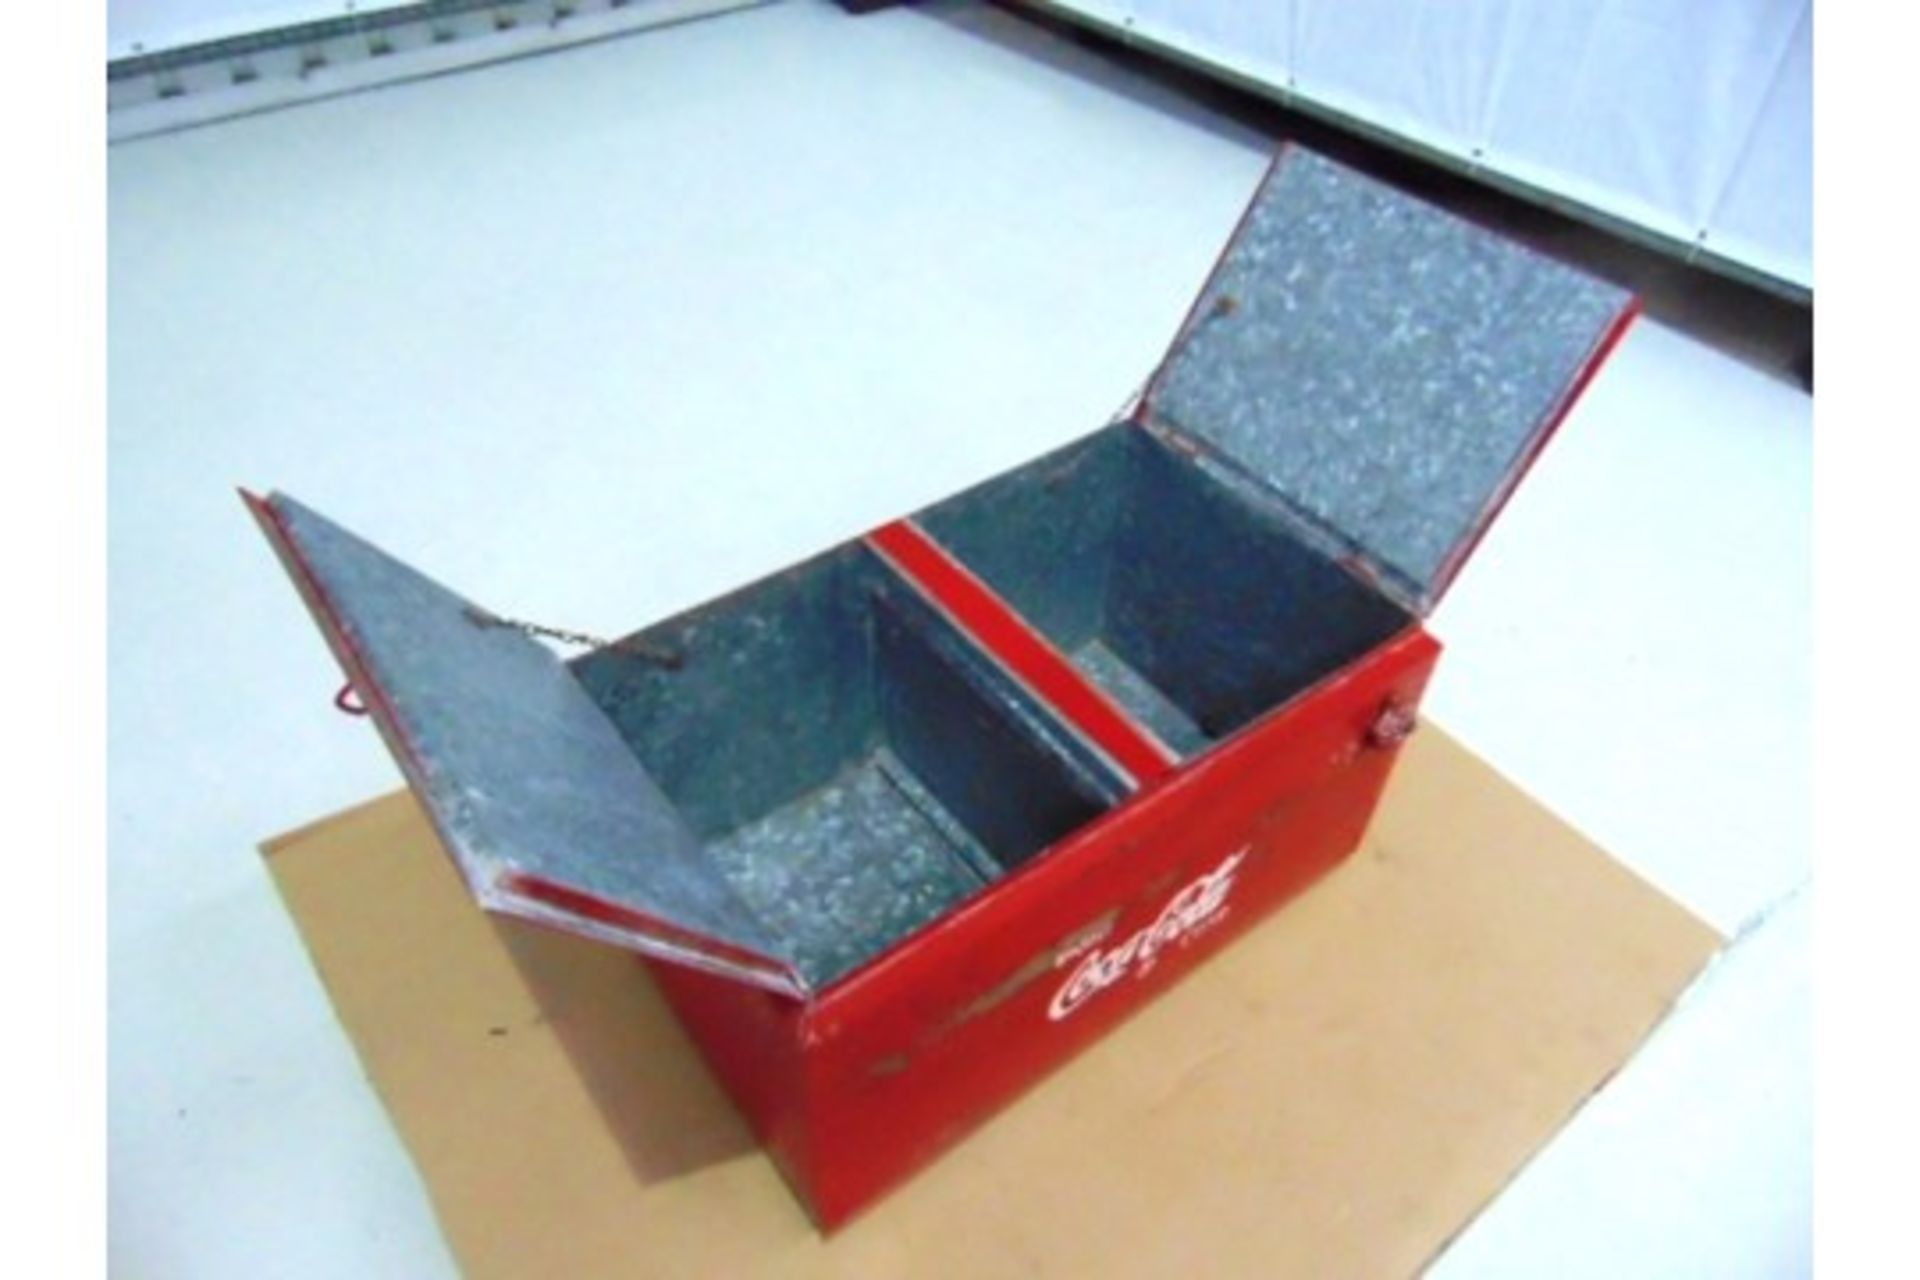 Vintage Coca Cola Double Cooler / Ice Box repro with period bottle opener. - Image 5 of 7